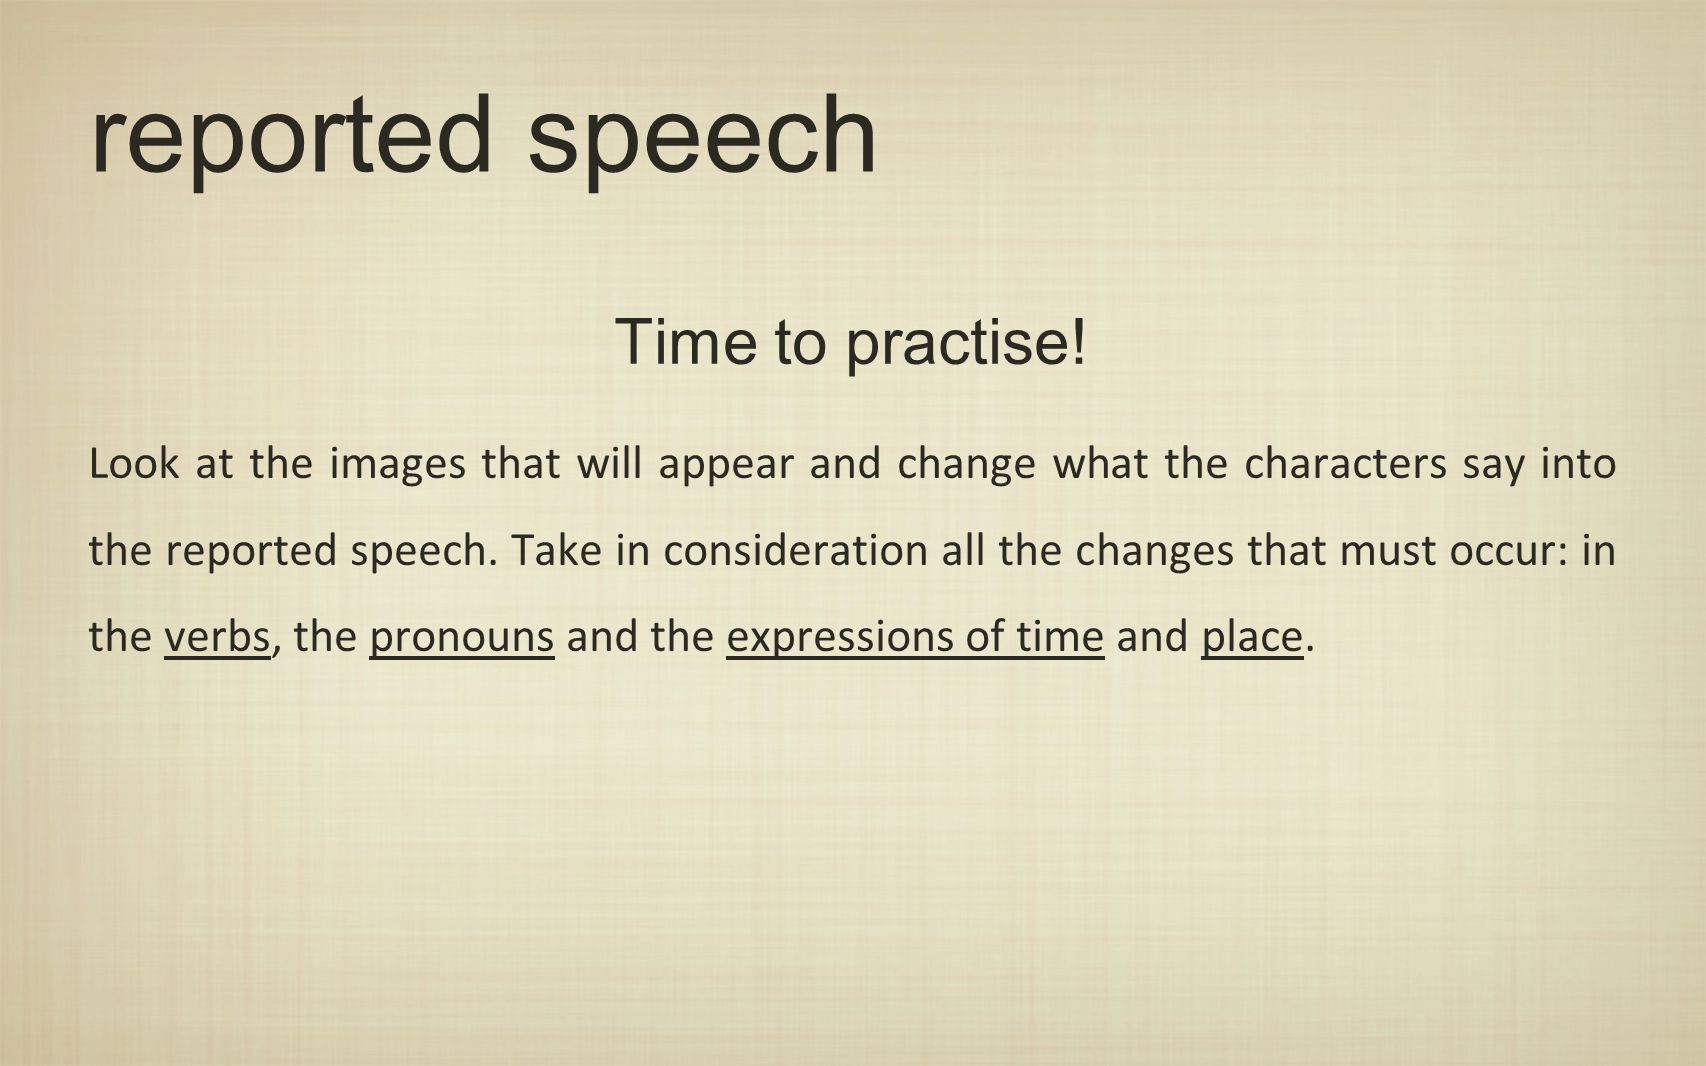 reported speech Time to practise!